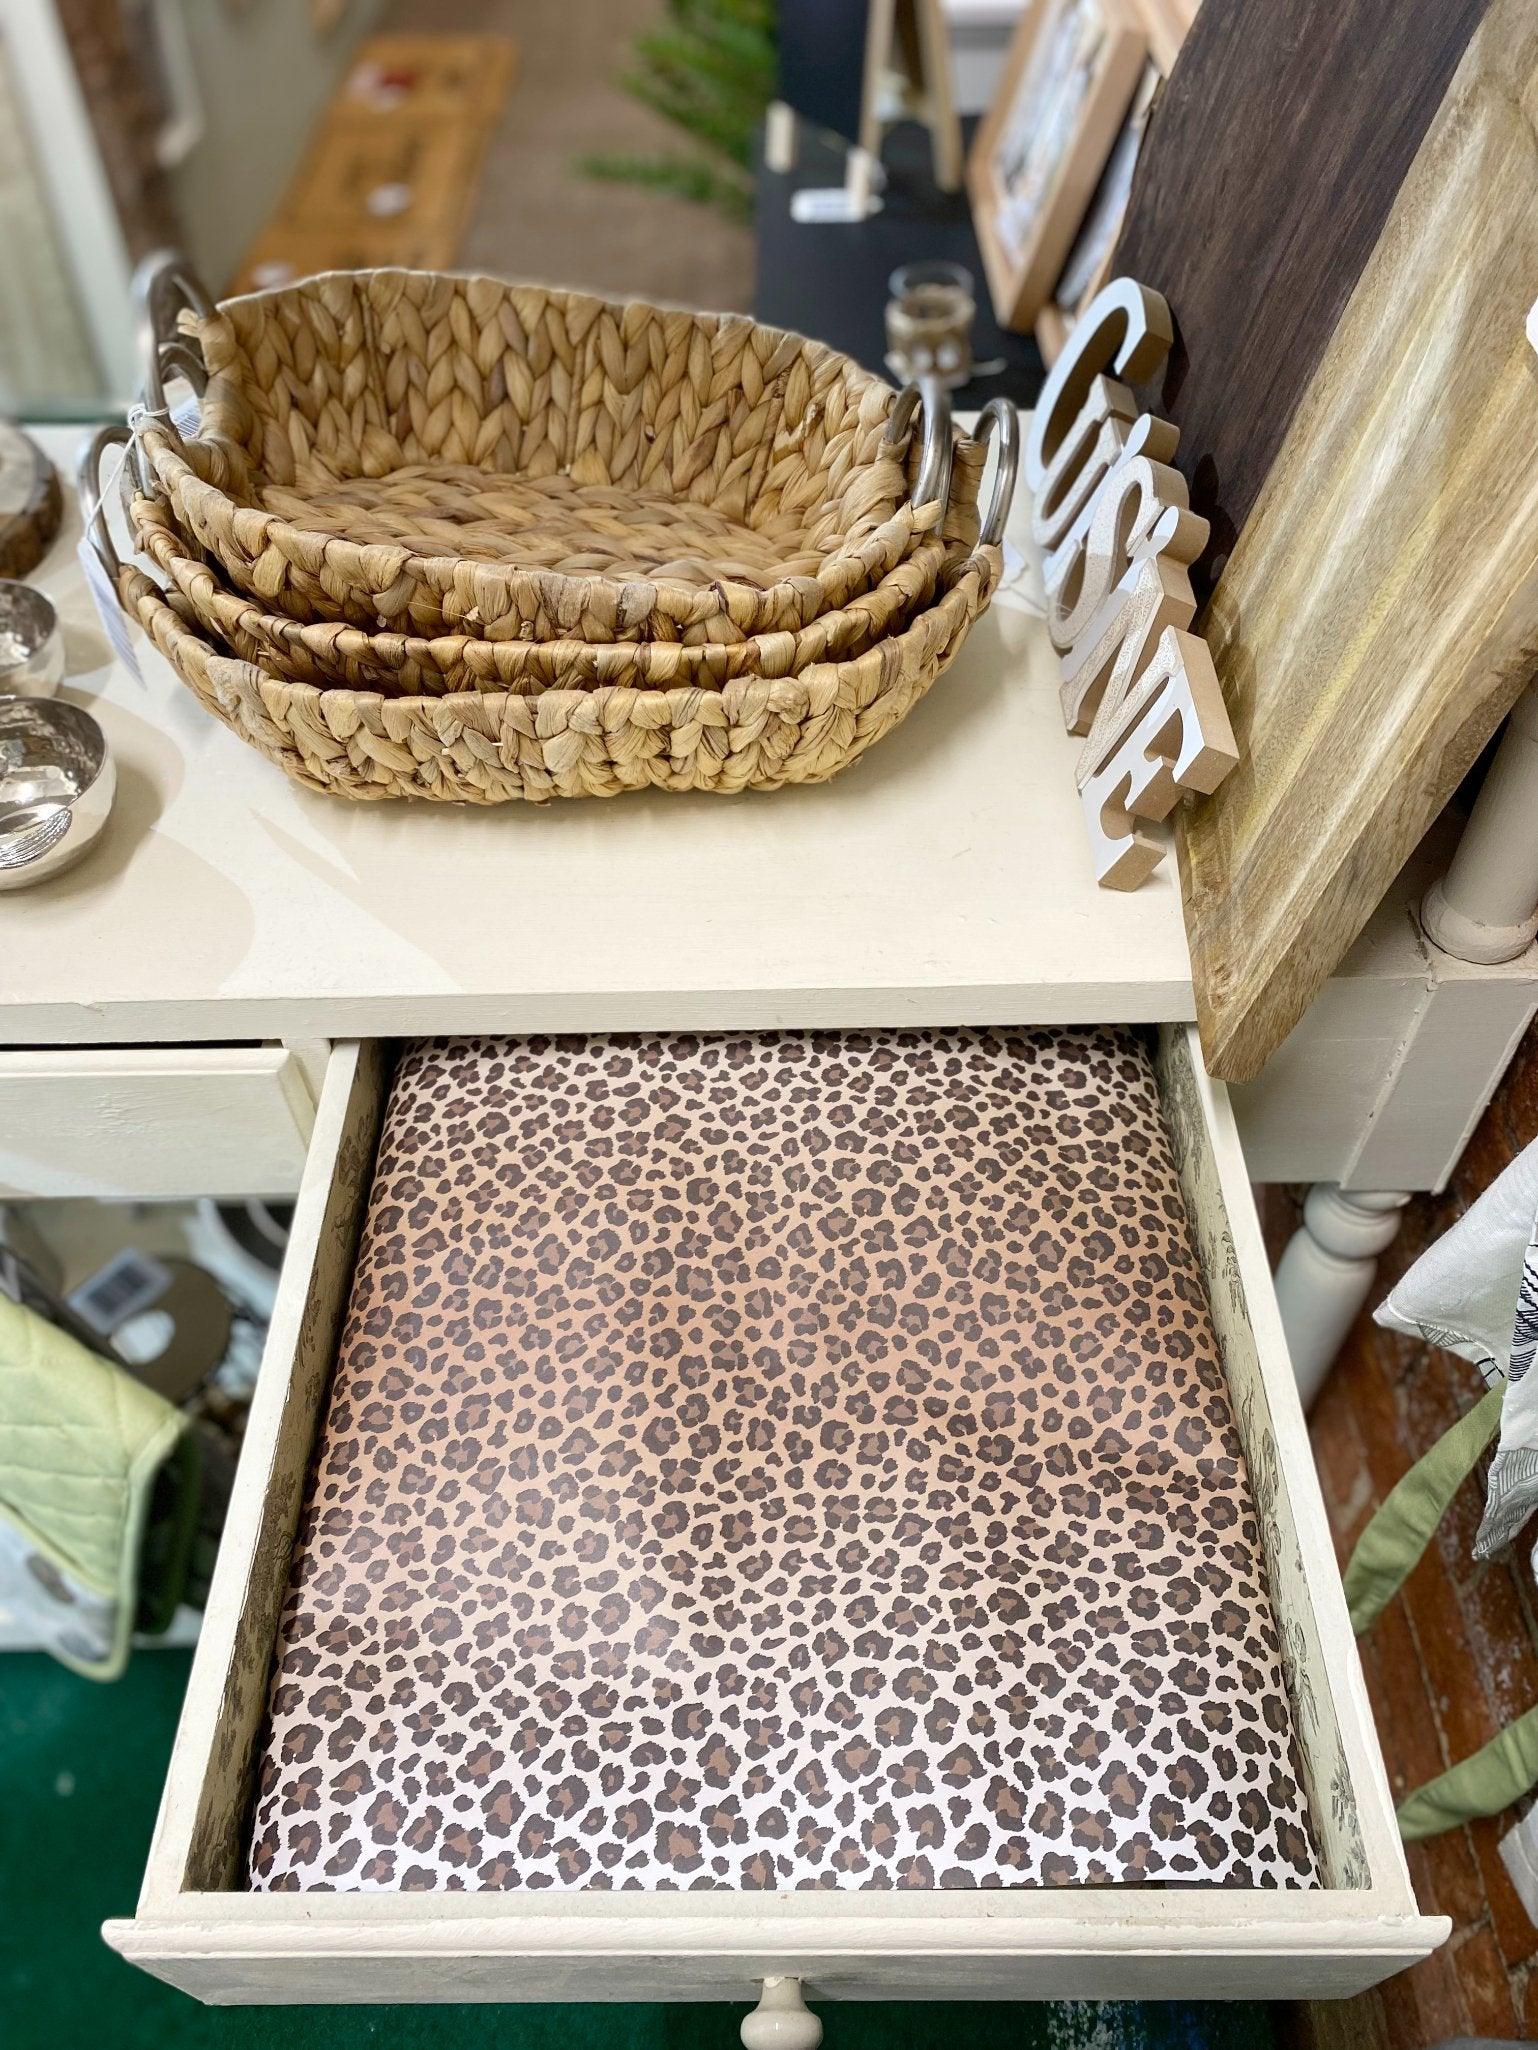 View Animal Print Fragranced Drawer Liners information